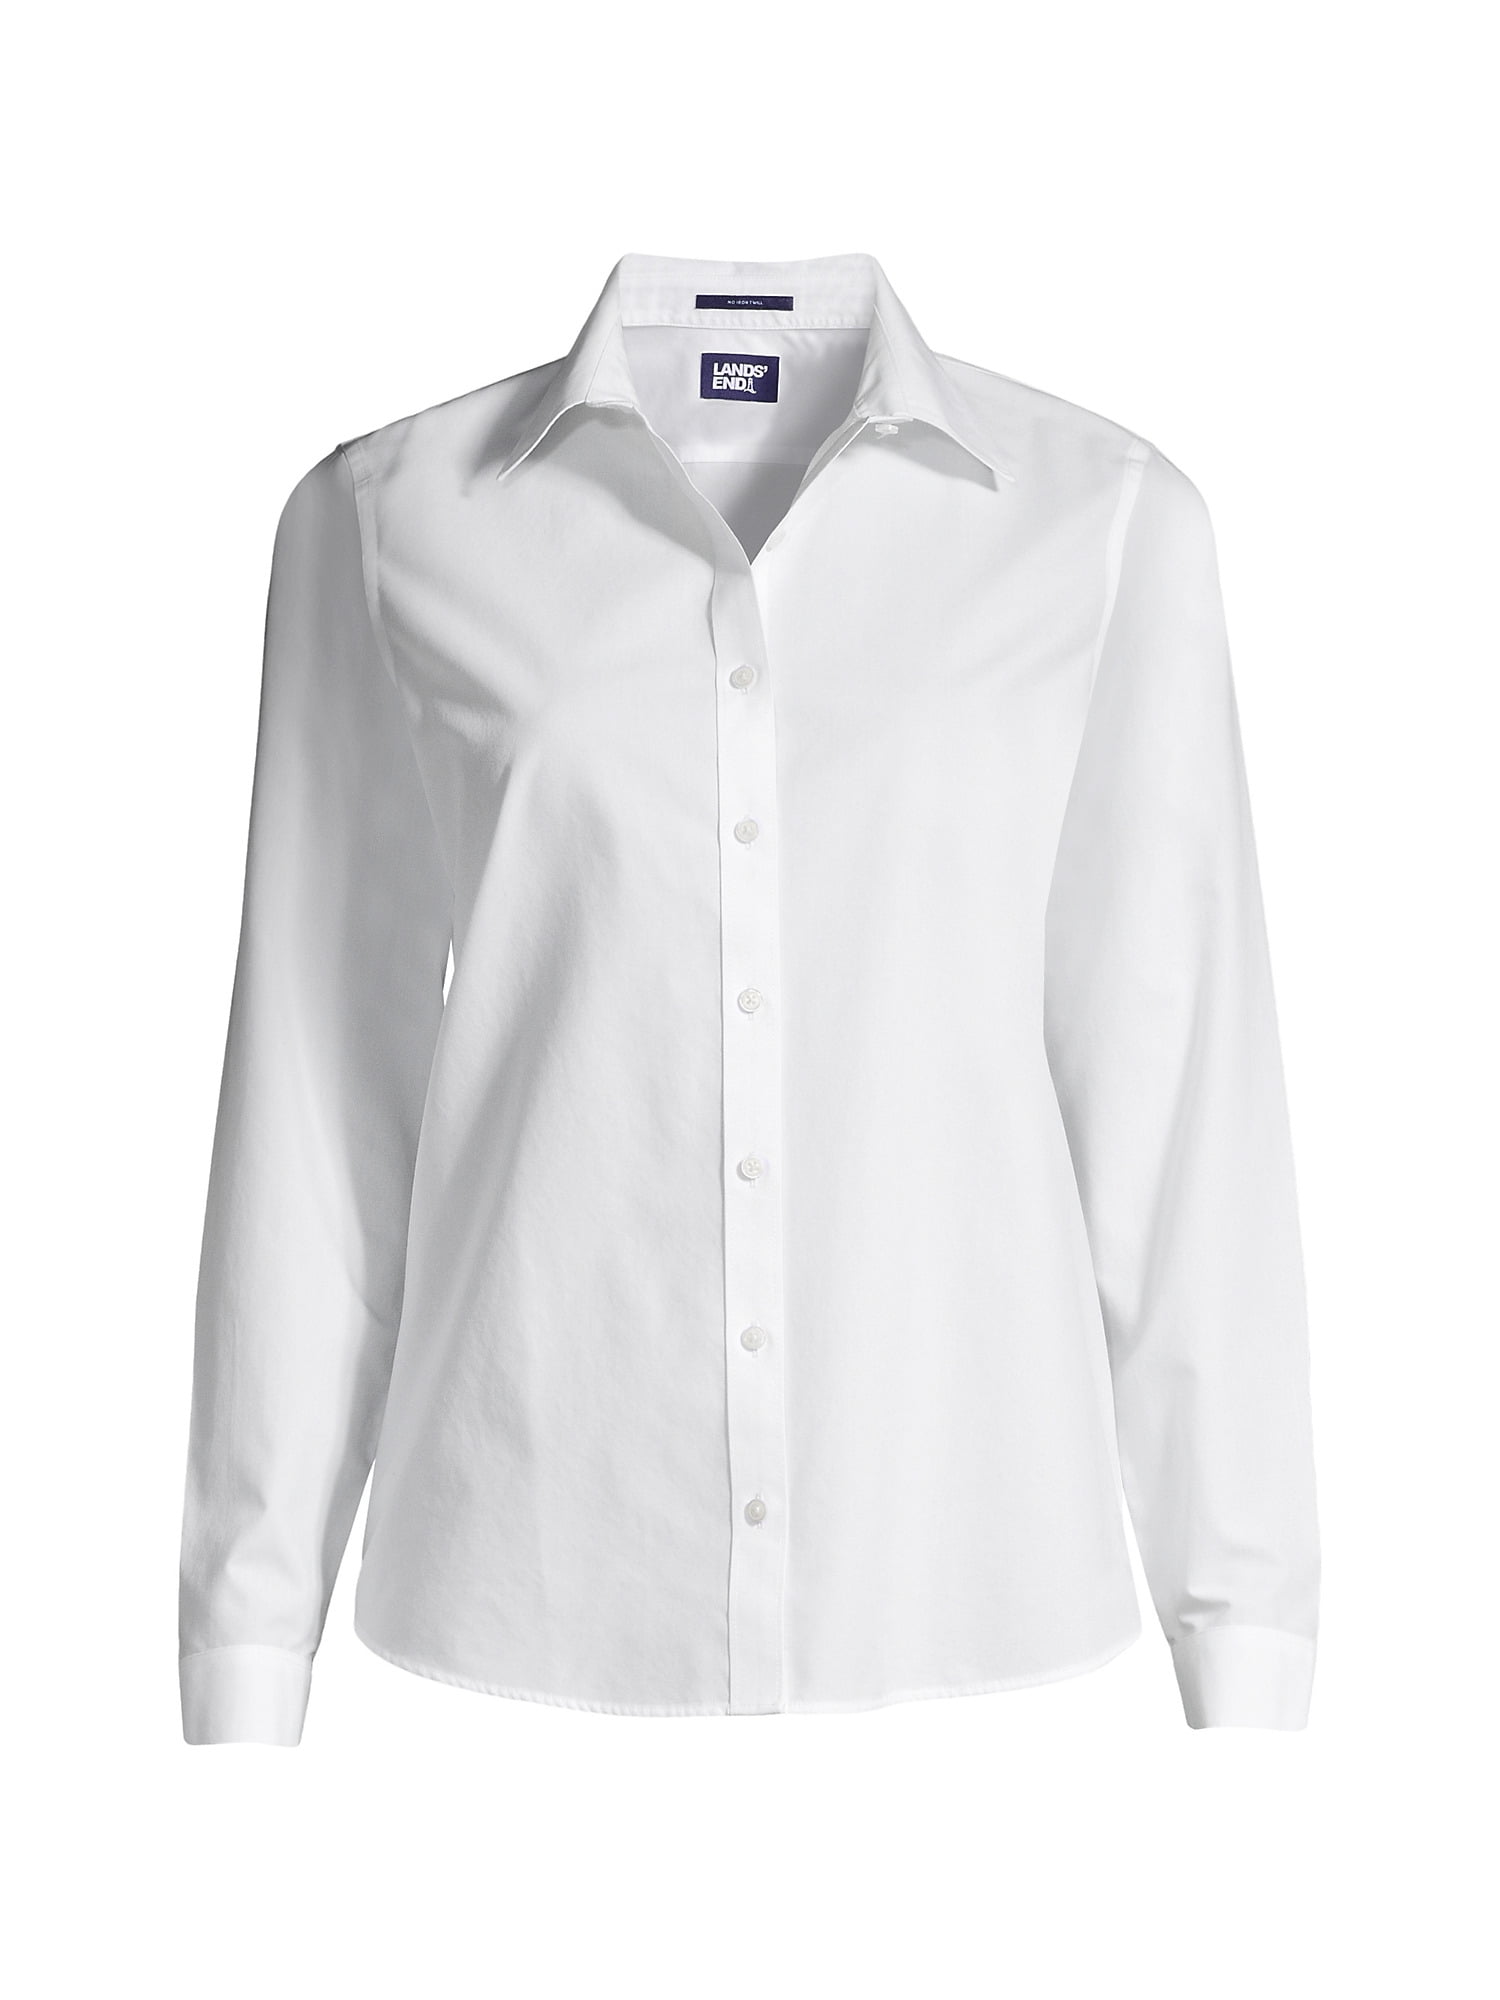 Lands' End Women's Wrinkle Free No Iron Button Front Shirt